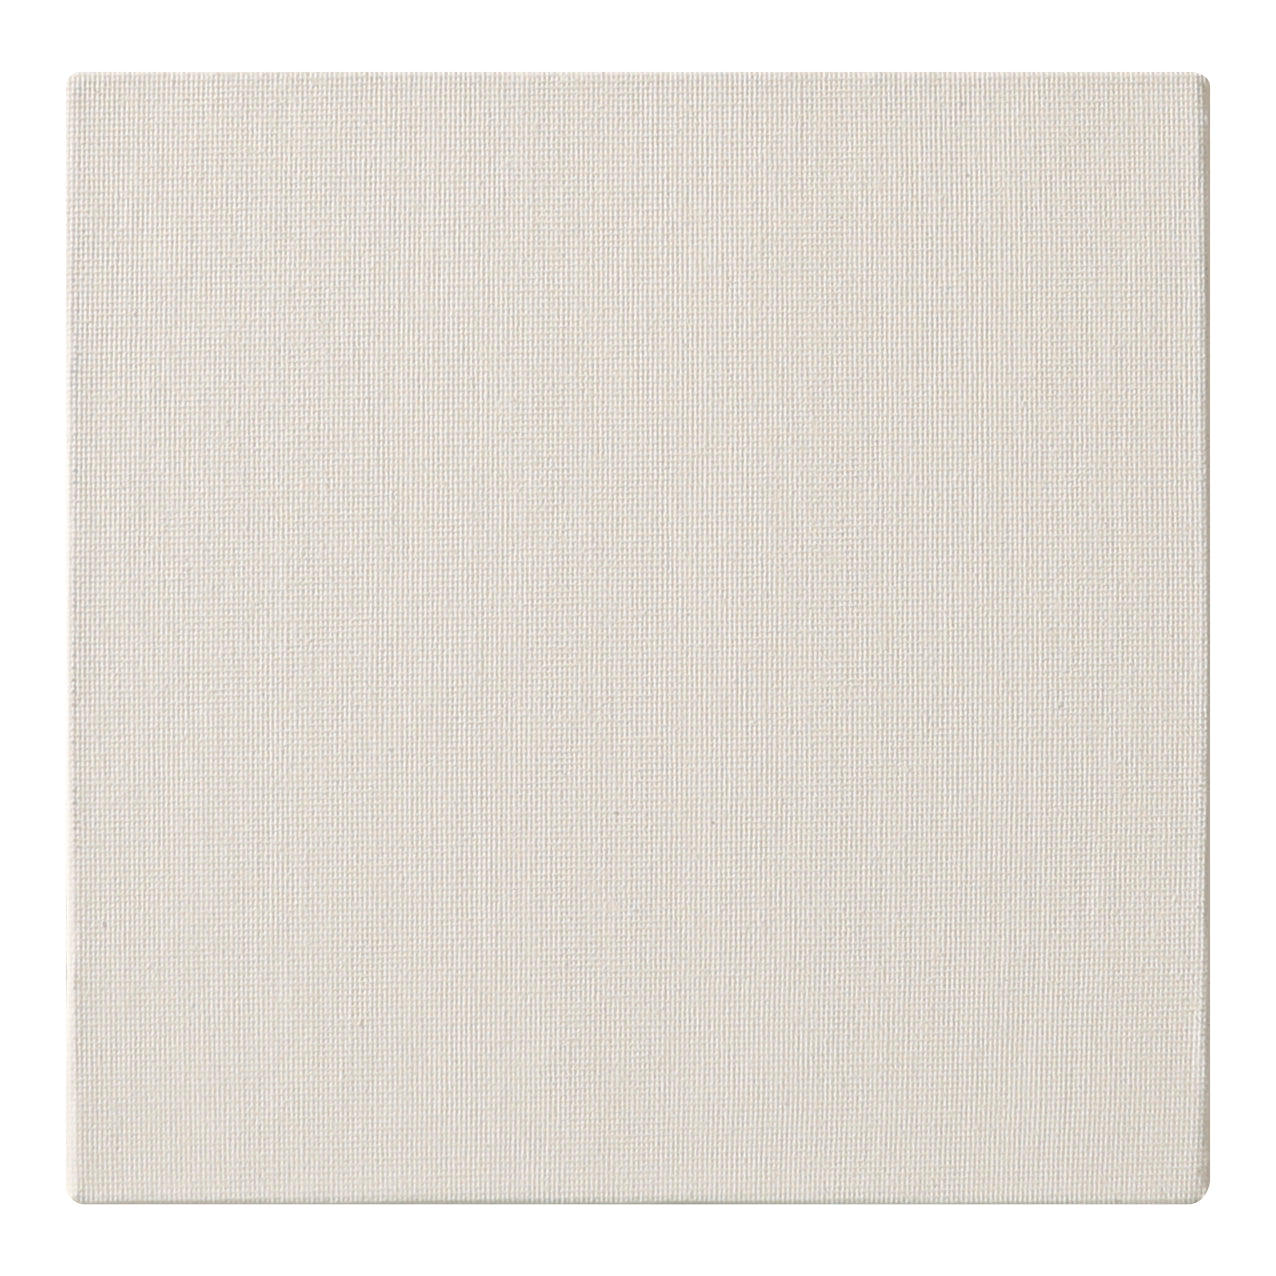 CLAIREFONTAINE Canvas Board Square White 3mm 15x15cm